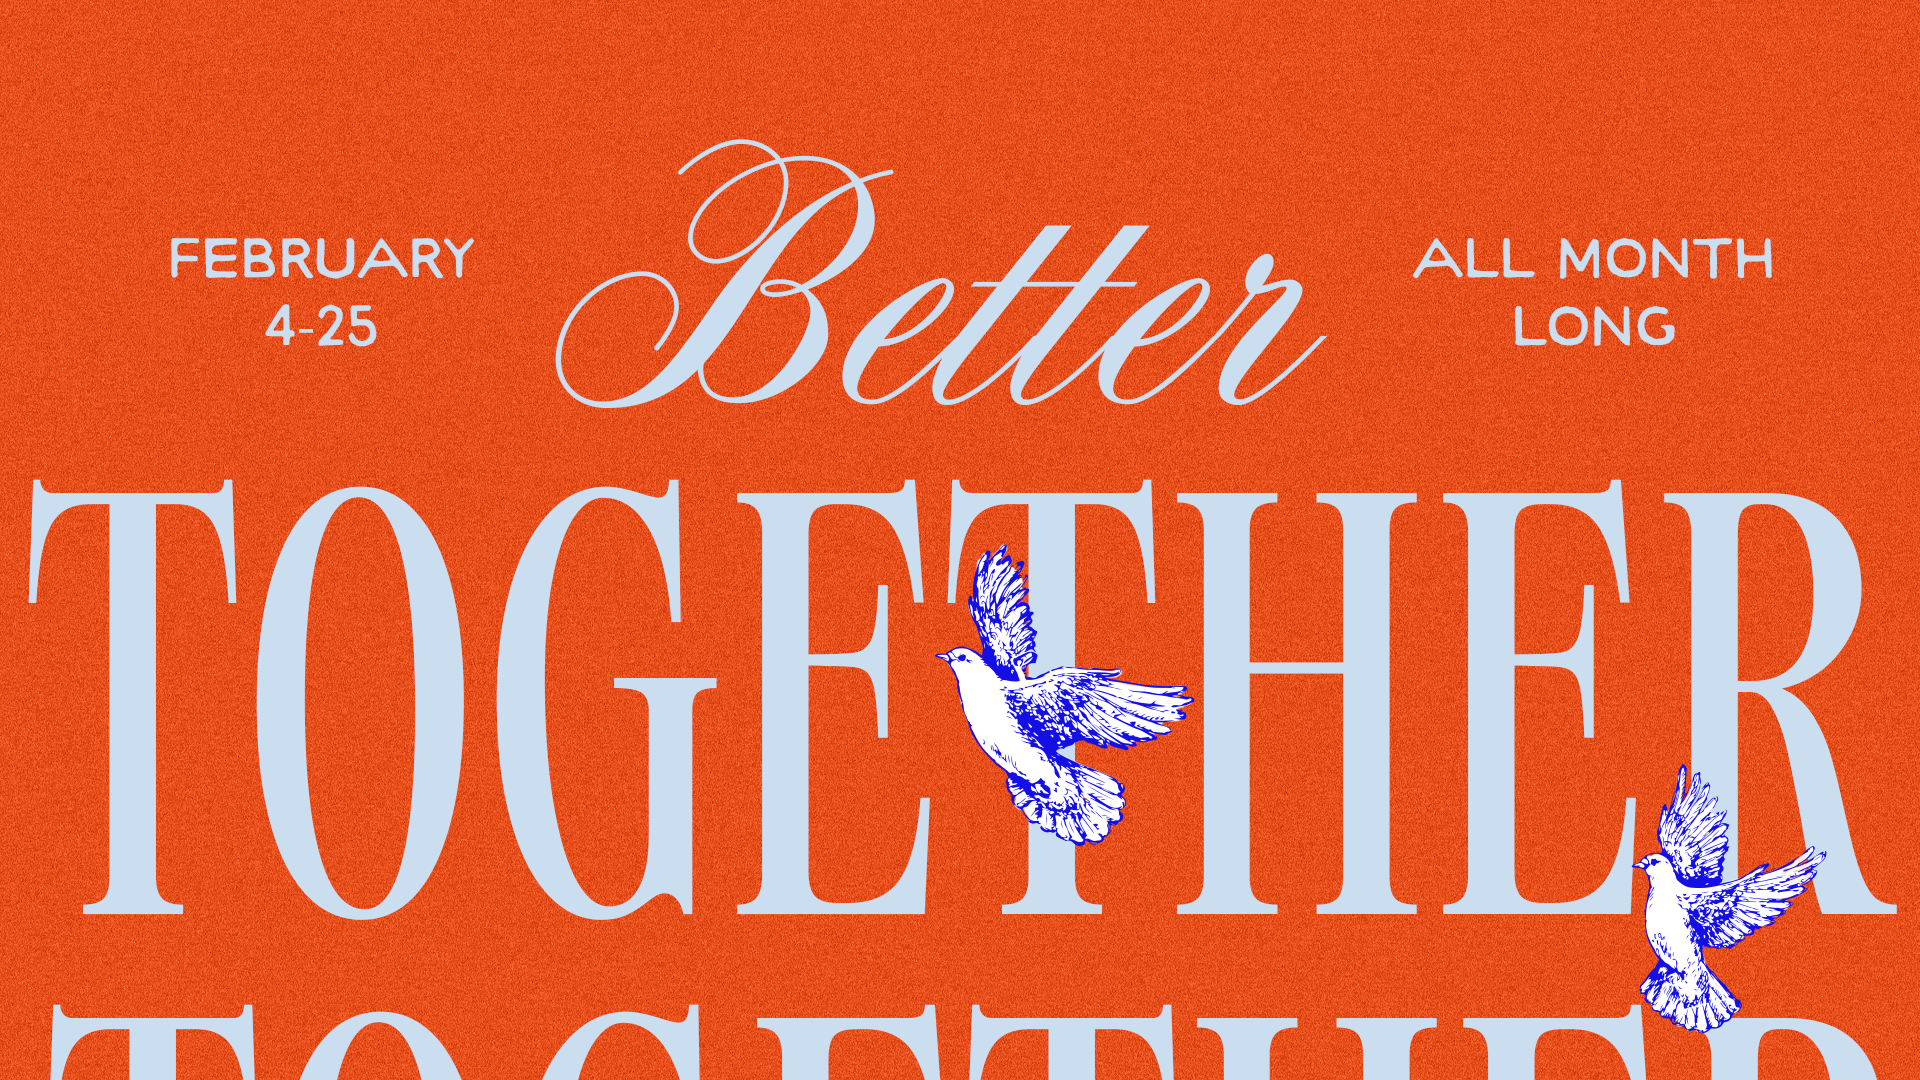 Better Together at the Orange County campus